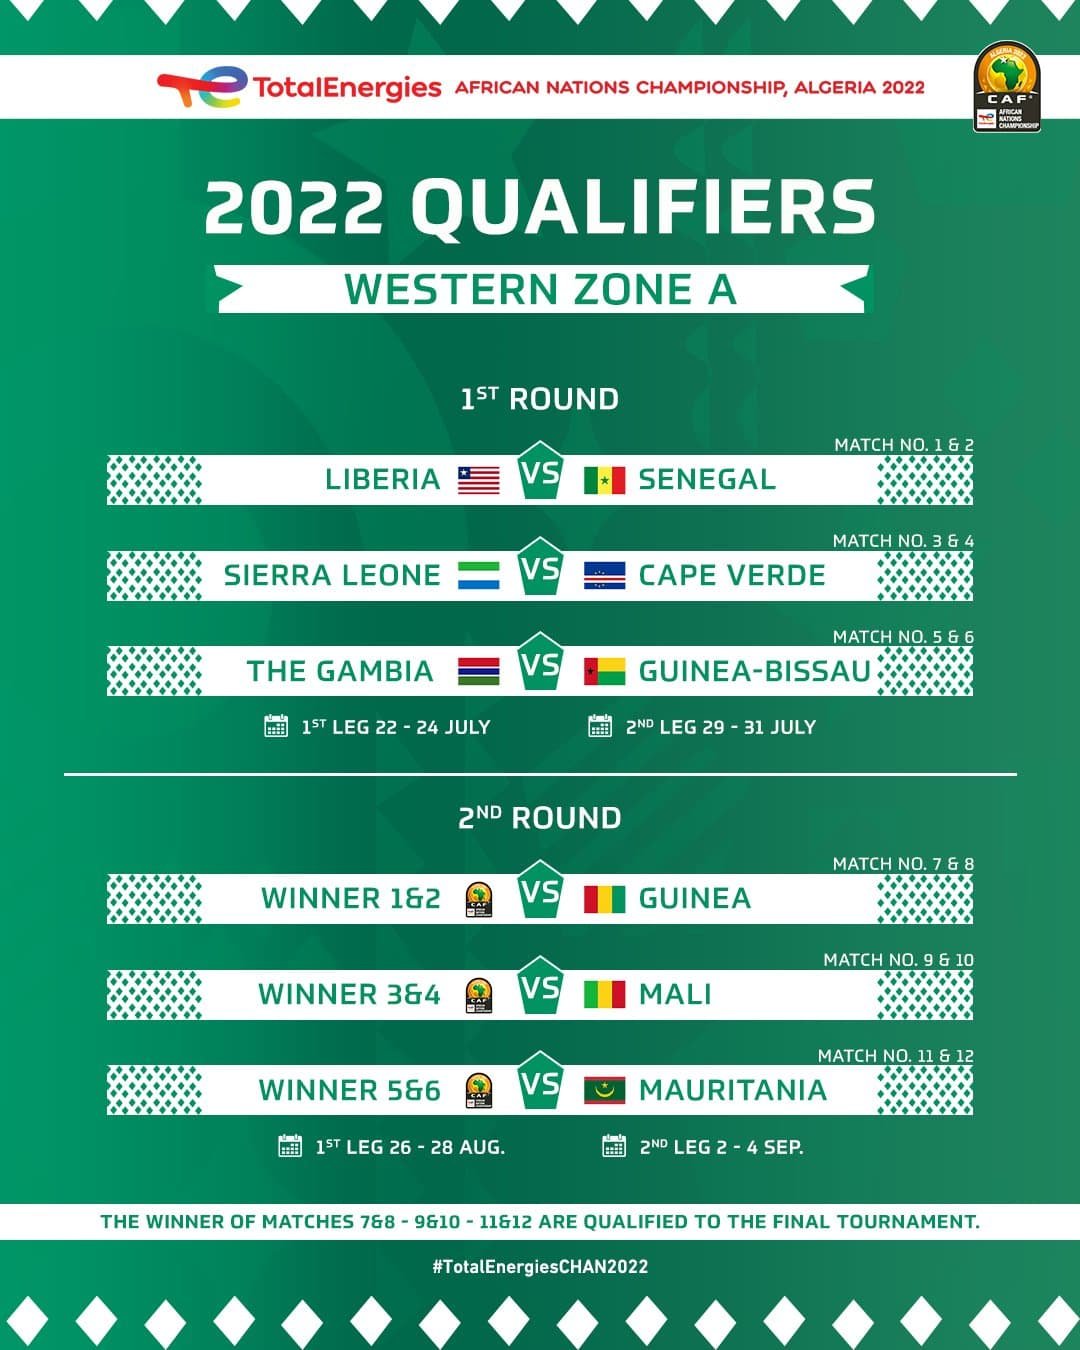 The draw for the 2022 African Nations Championship (CHAN) qualifiers has been held in Cairo - here is second round zone A fixtures.